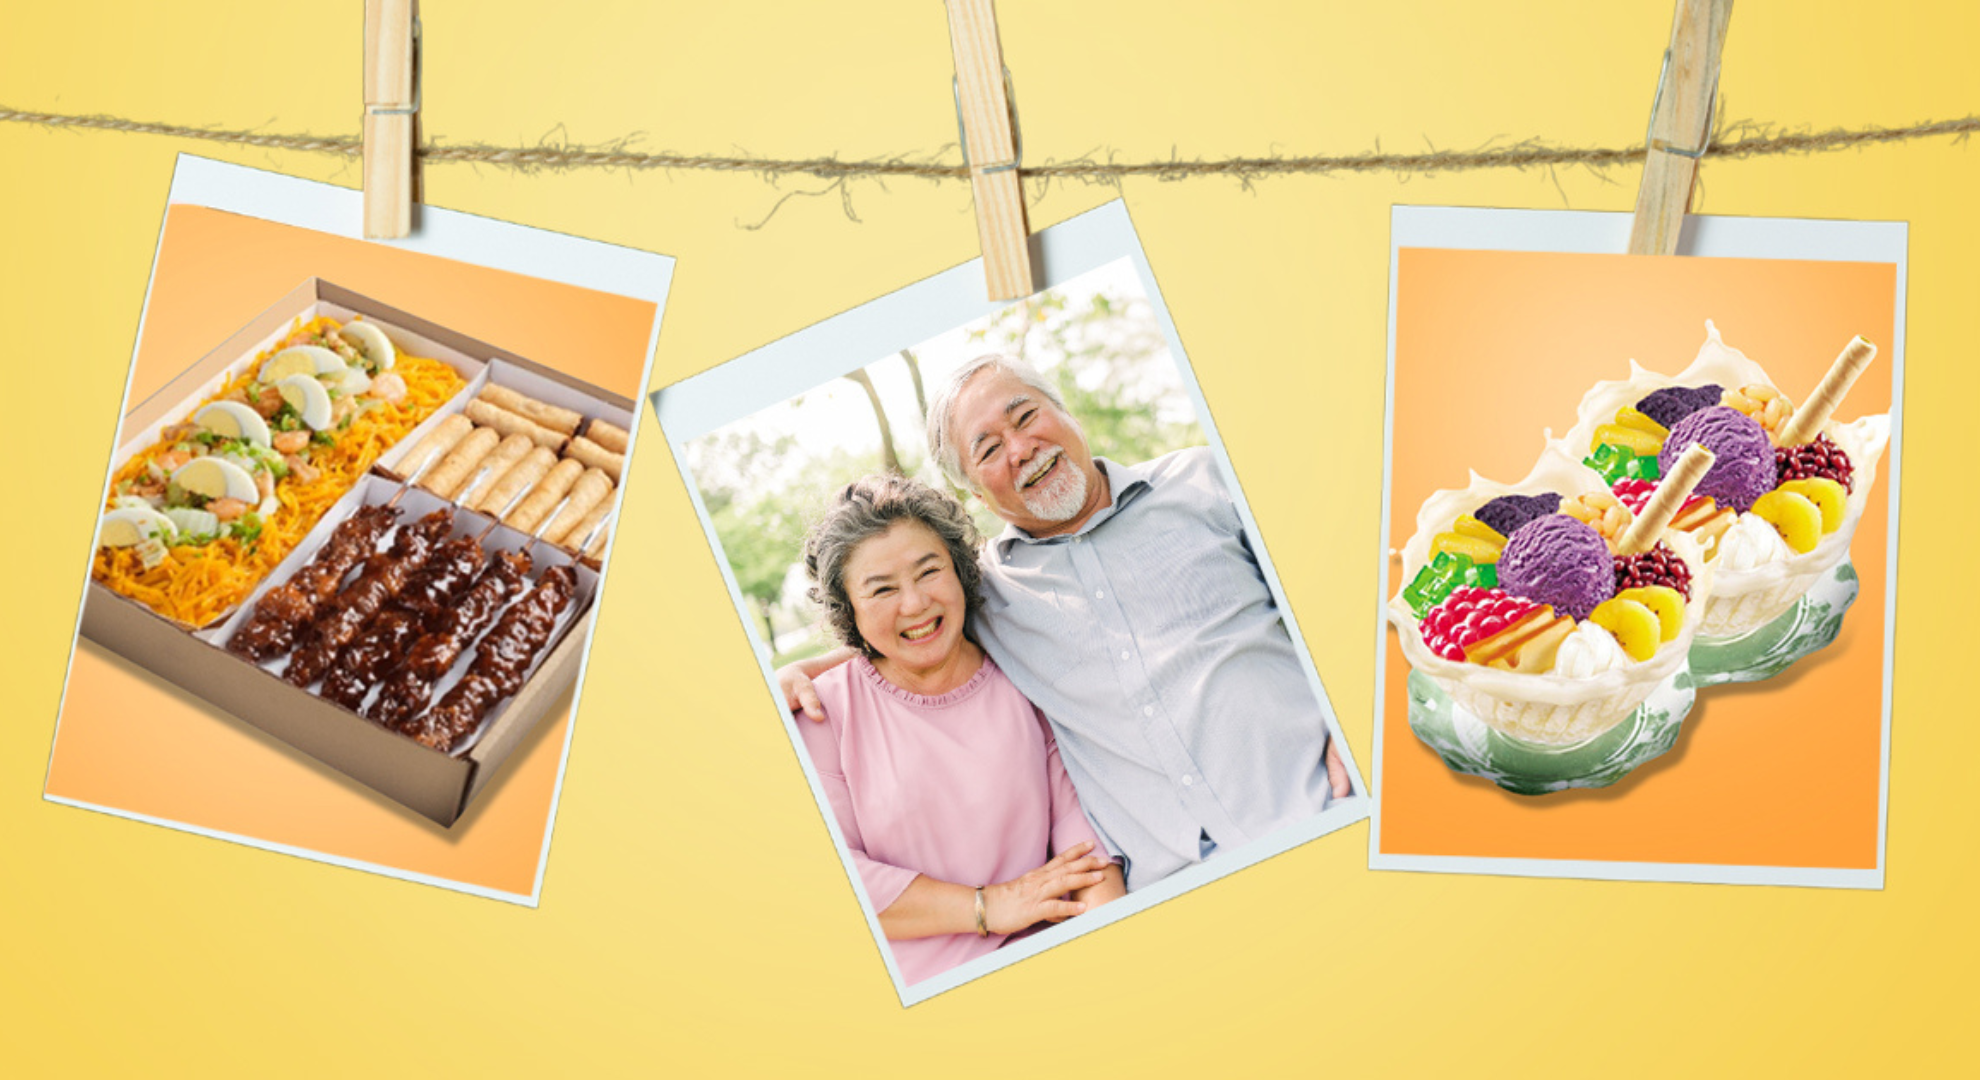 Lolo and lola-approved: The heartiest food for your Grandparents’ Day menu